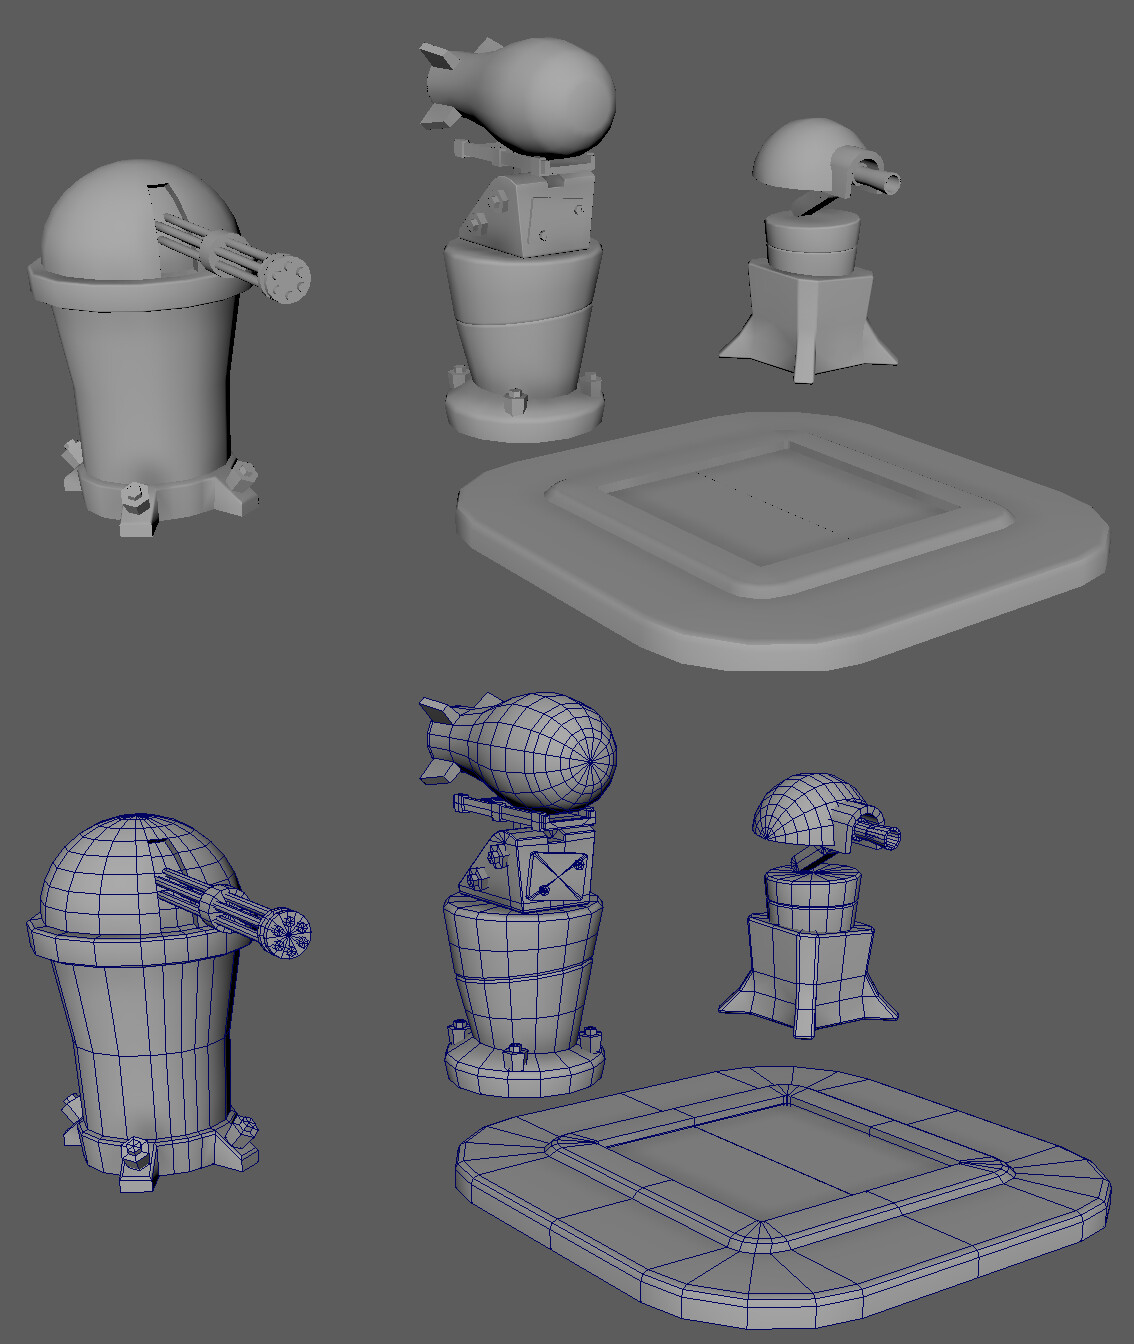 WIP | Enemy Turrets for "Die! This World"